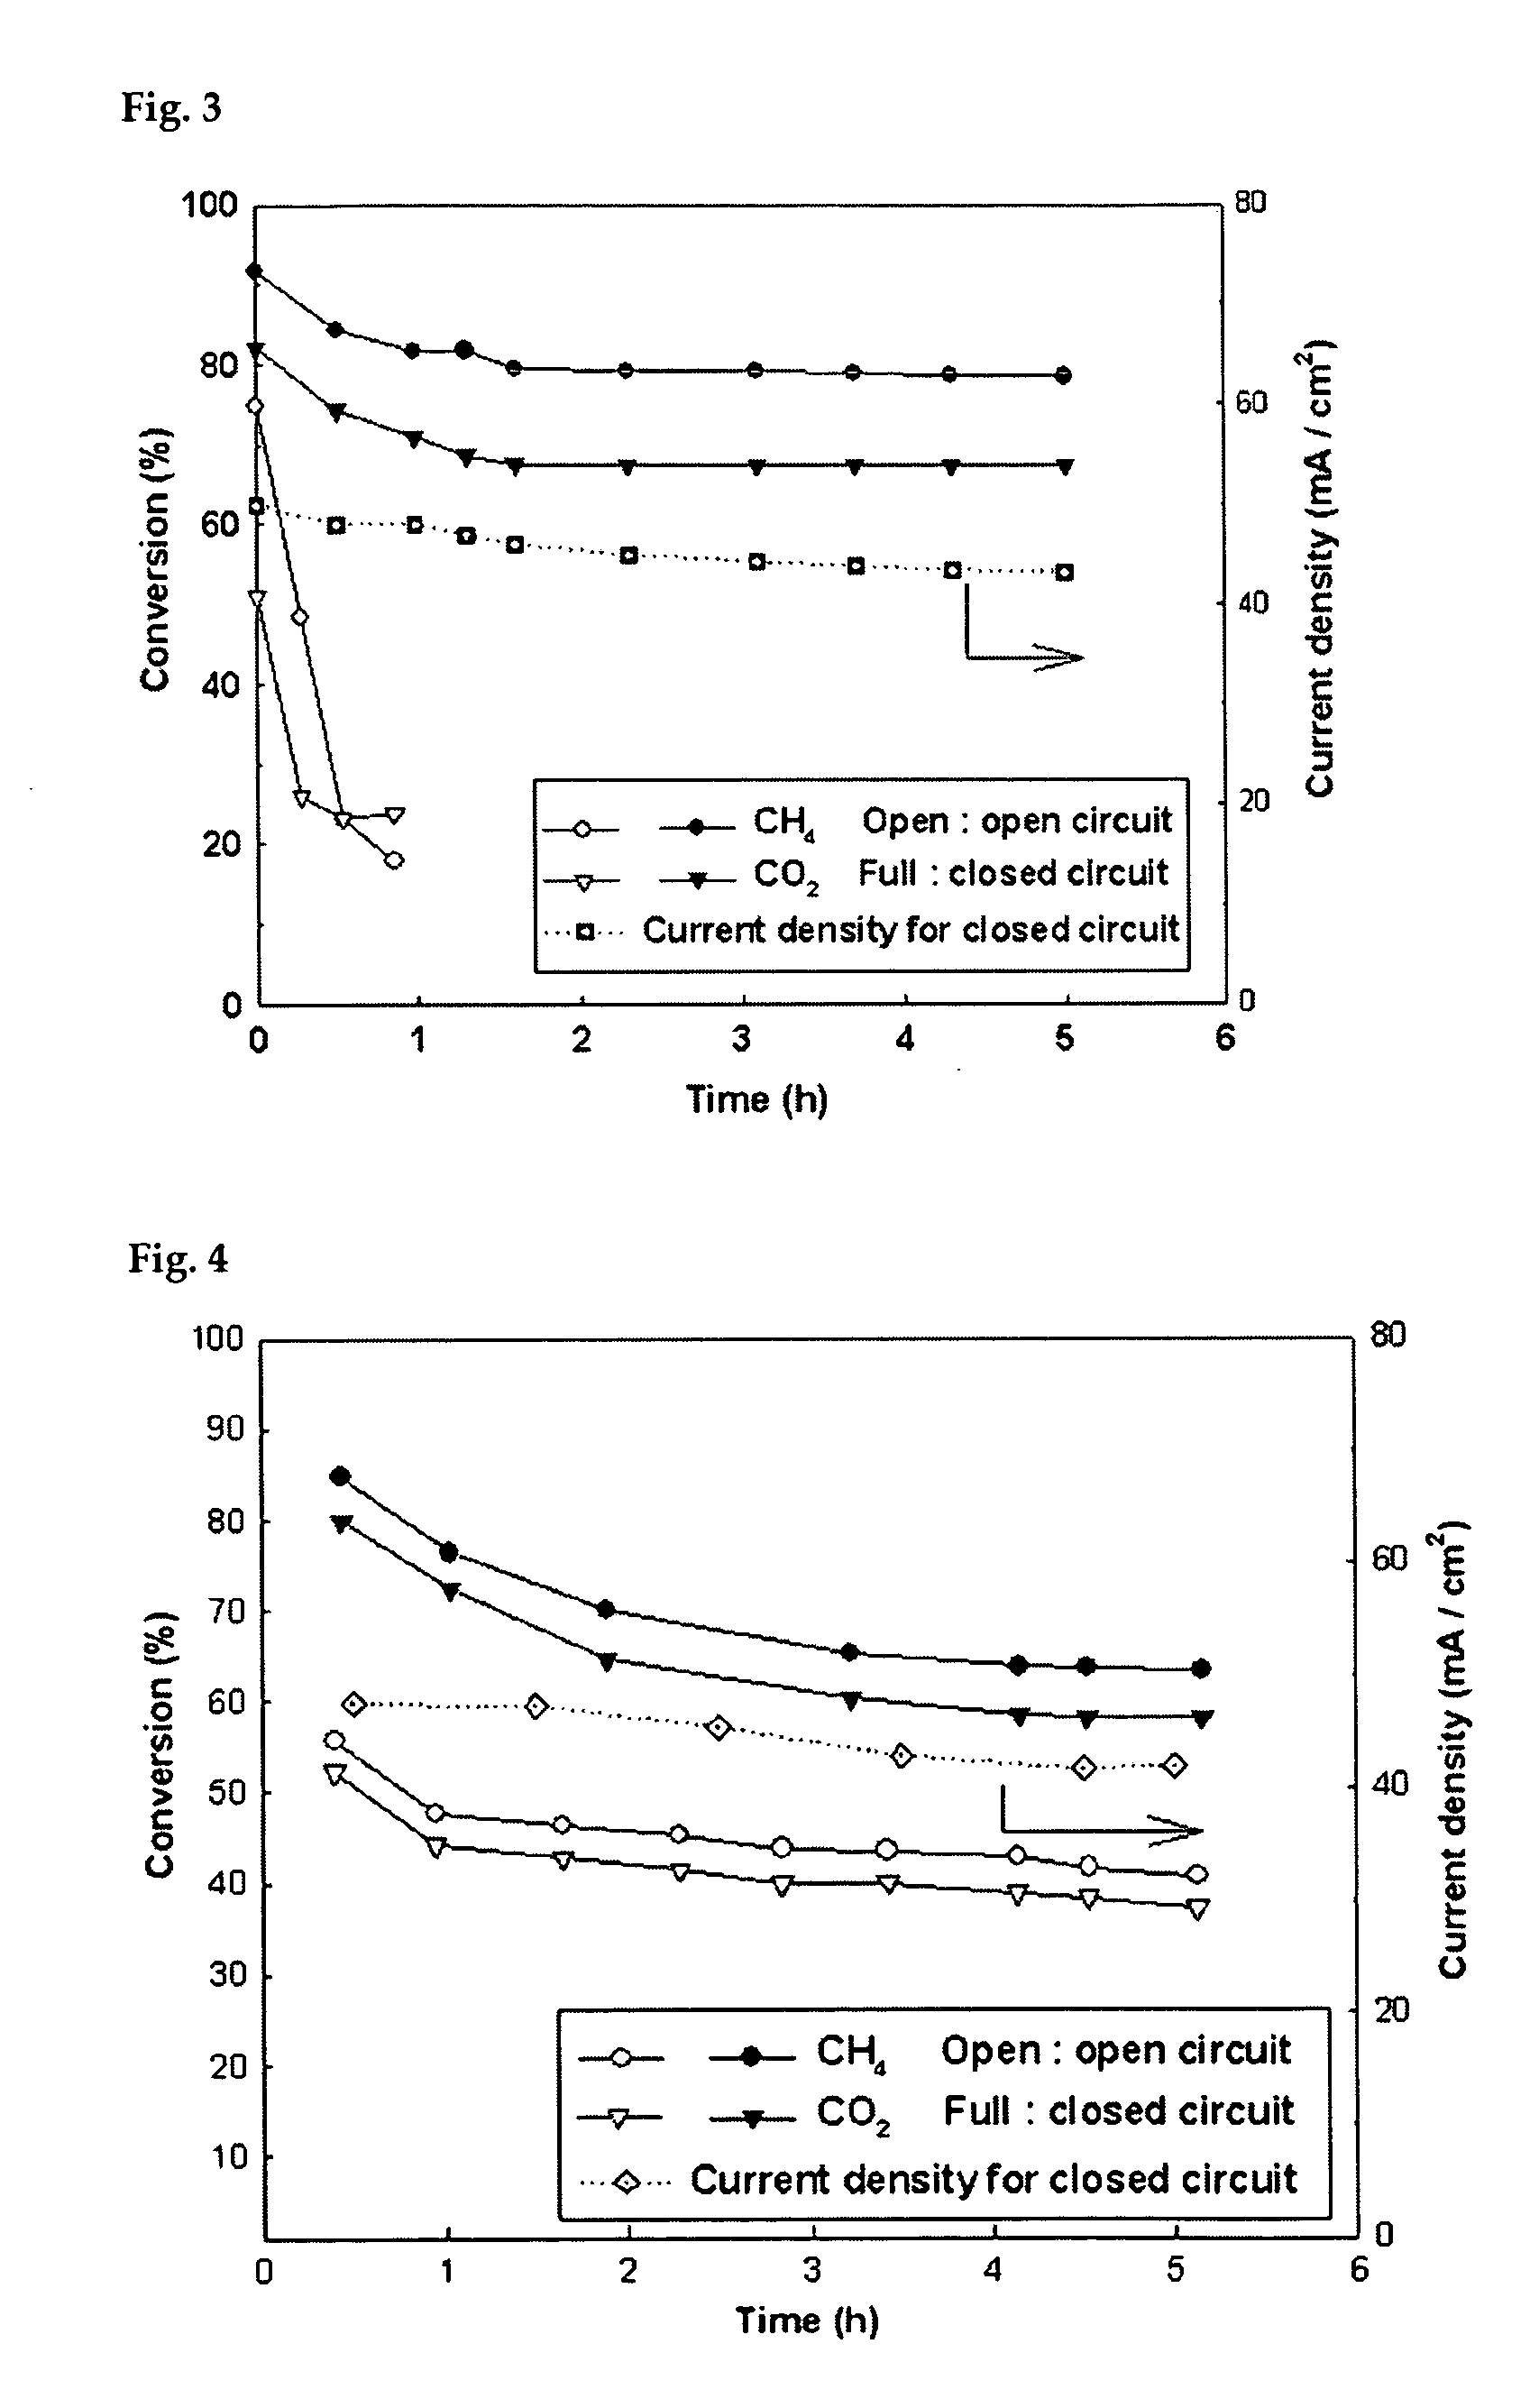 Solid oxide fuel cell (SOFC) for coproducing syngas and electricity by the internal reforming of carbon dioxide by hydrocarbons and electrochemical membrane reactor system